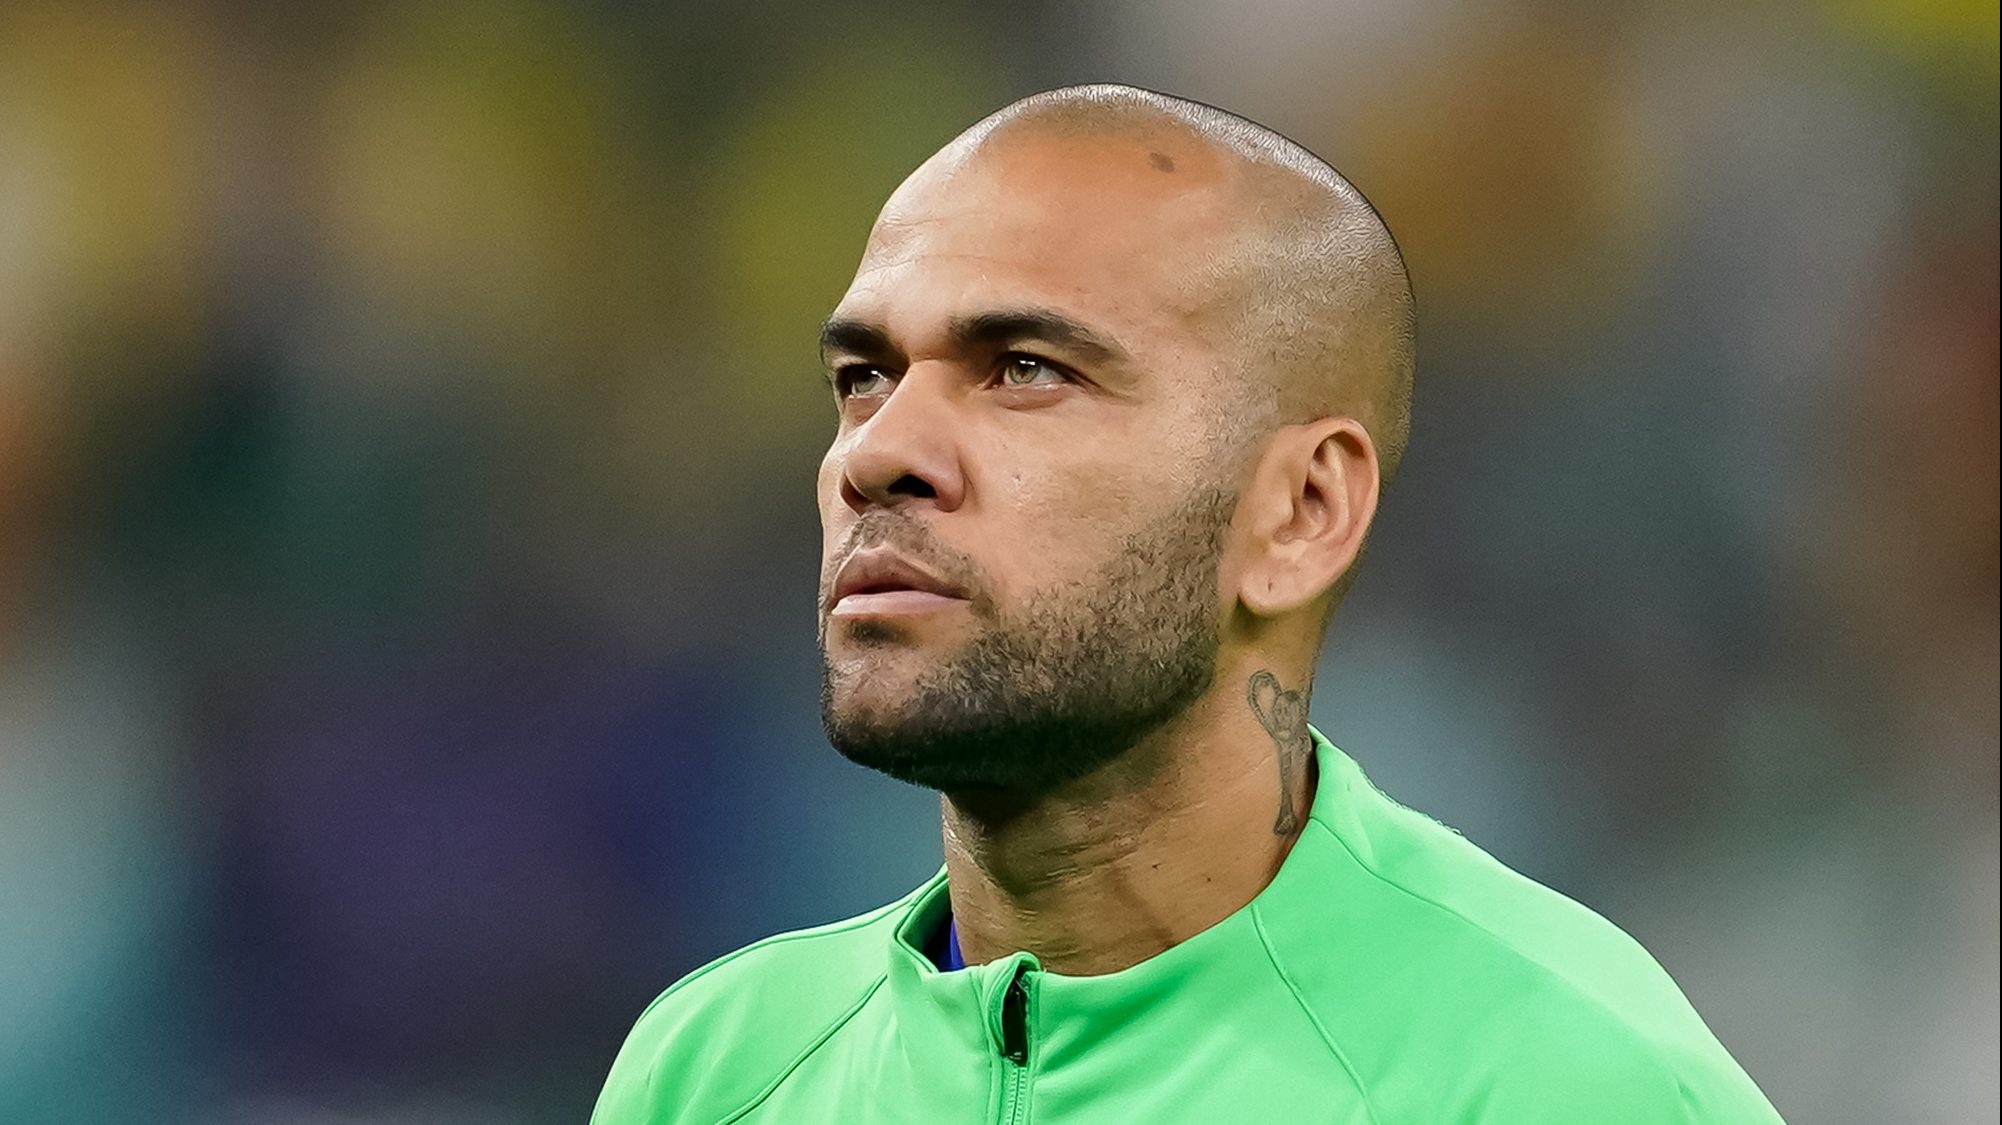 Player of Brazil Dani Alves signs the national anthem before the FIFA World Cup Qatar 2022 group G match between Brazil and Cameroon at Lusail Stadium on December 2, 2022 in Lusail, Qatar.